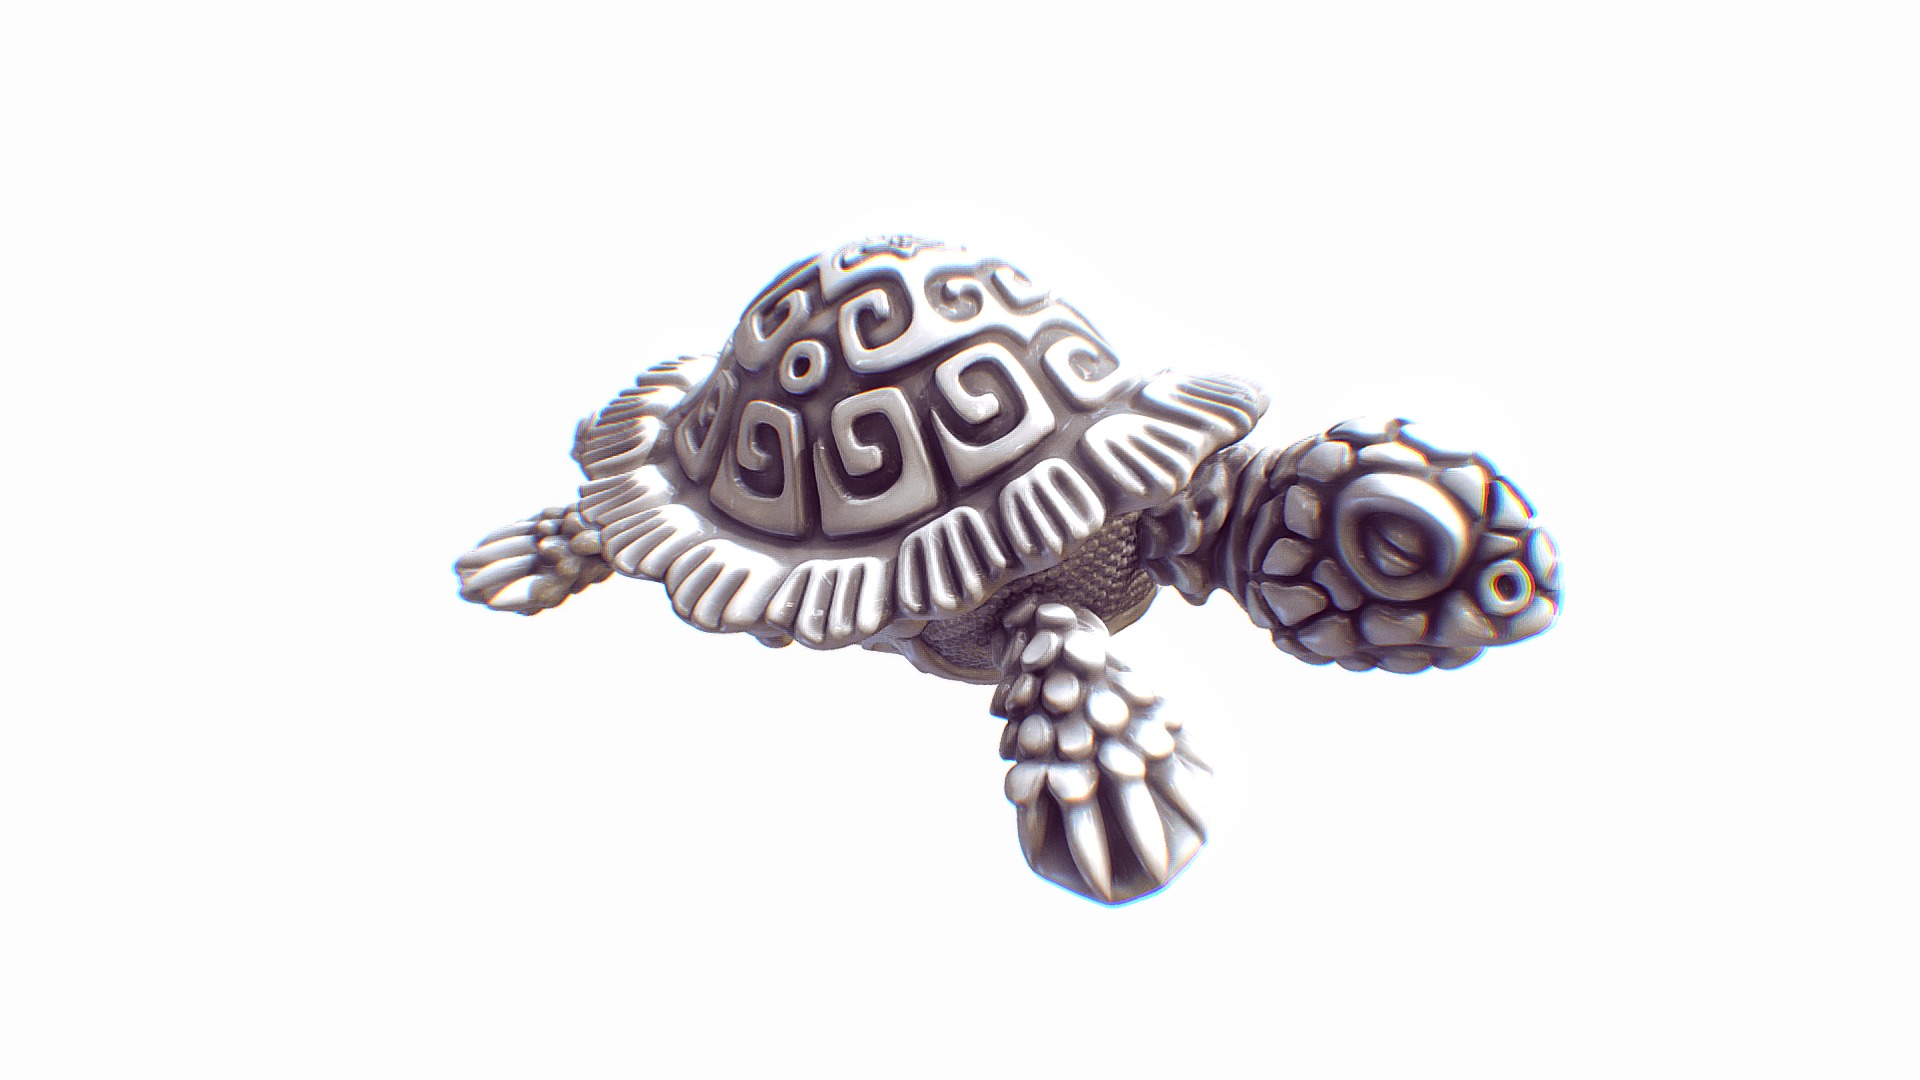 3D model Turtle - This is a 3D model of the Turtle. The 3D model is about a colorful snake with a white background.